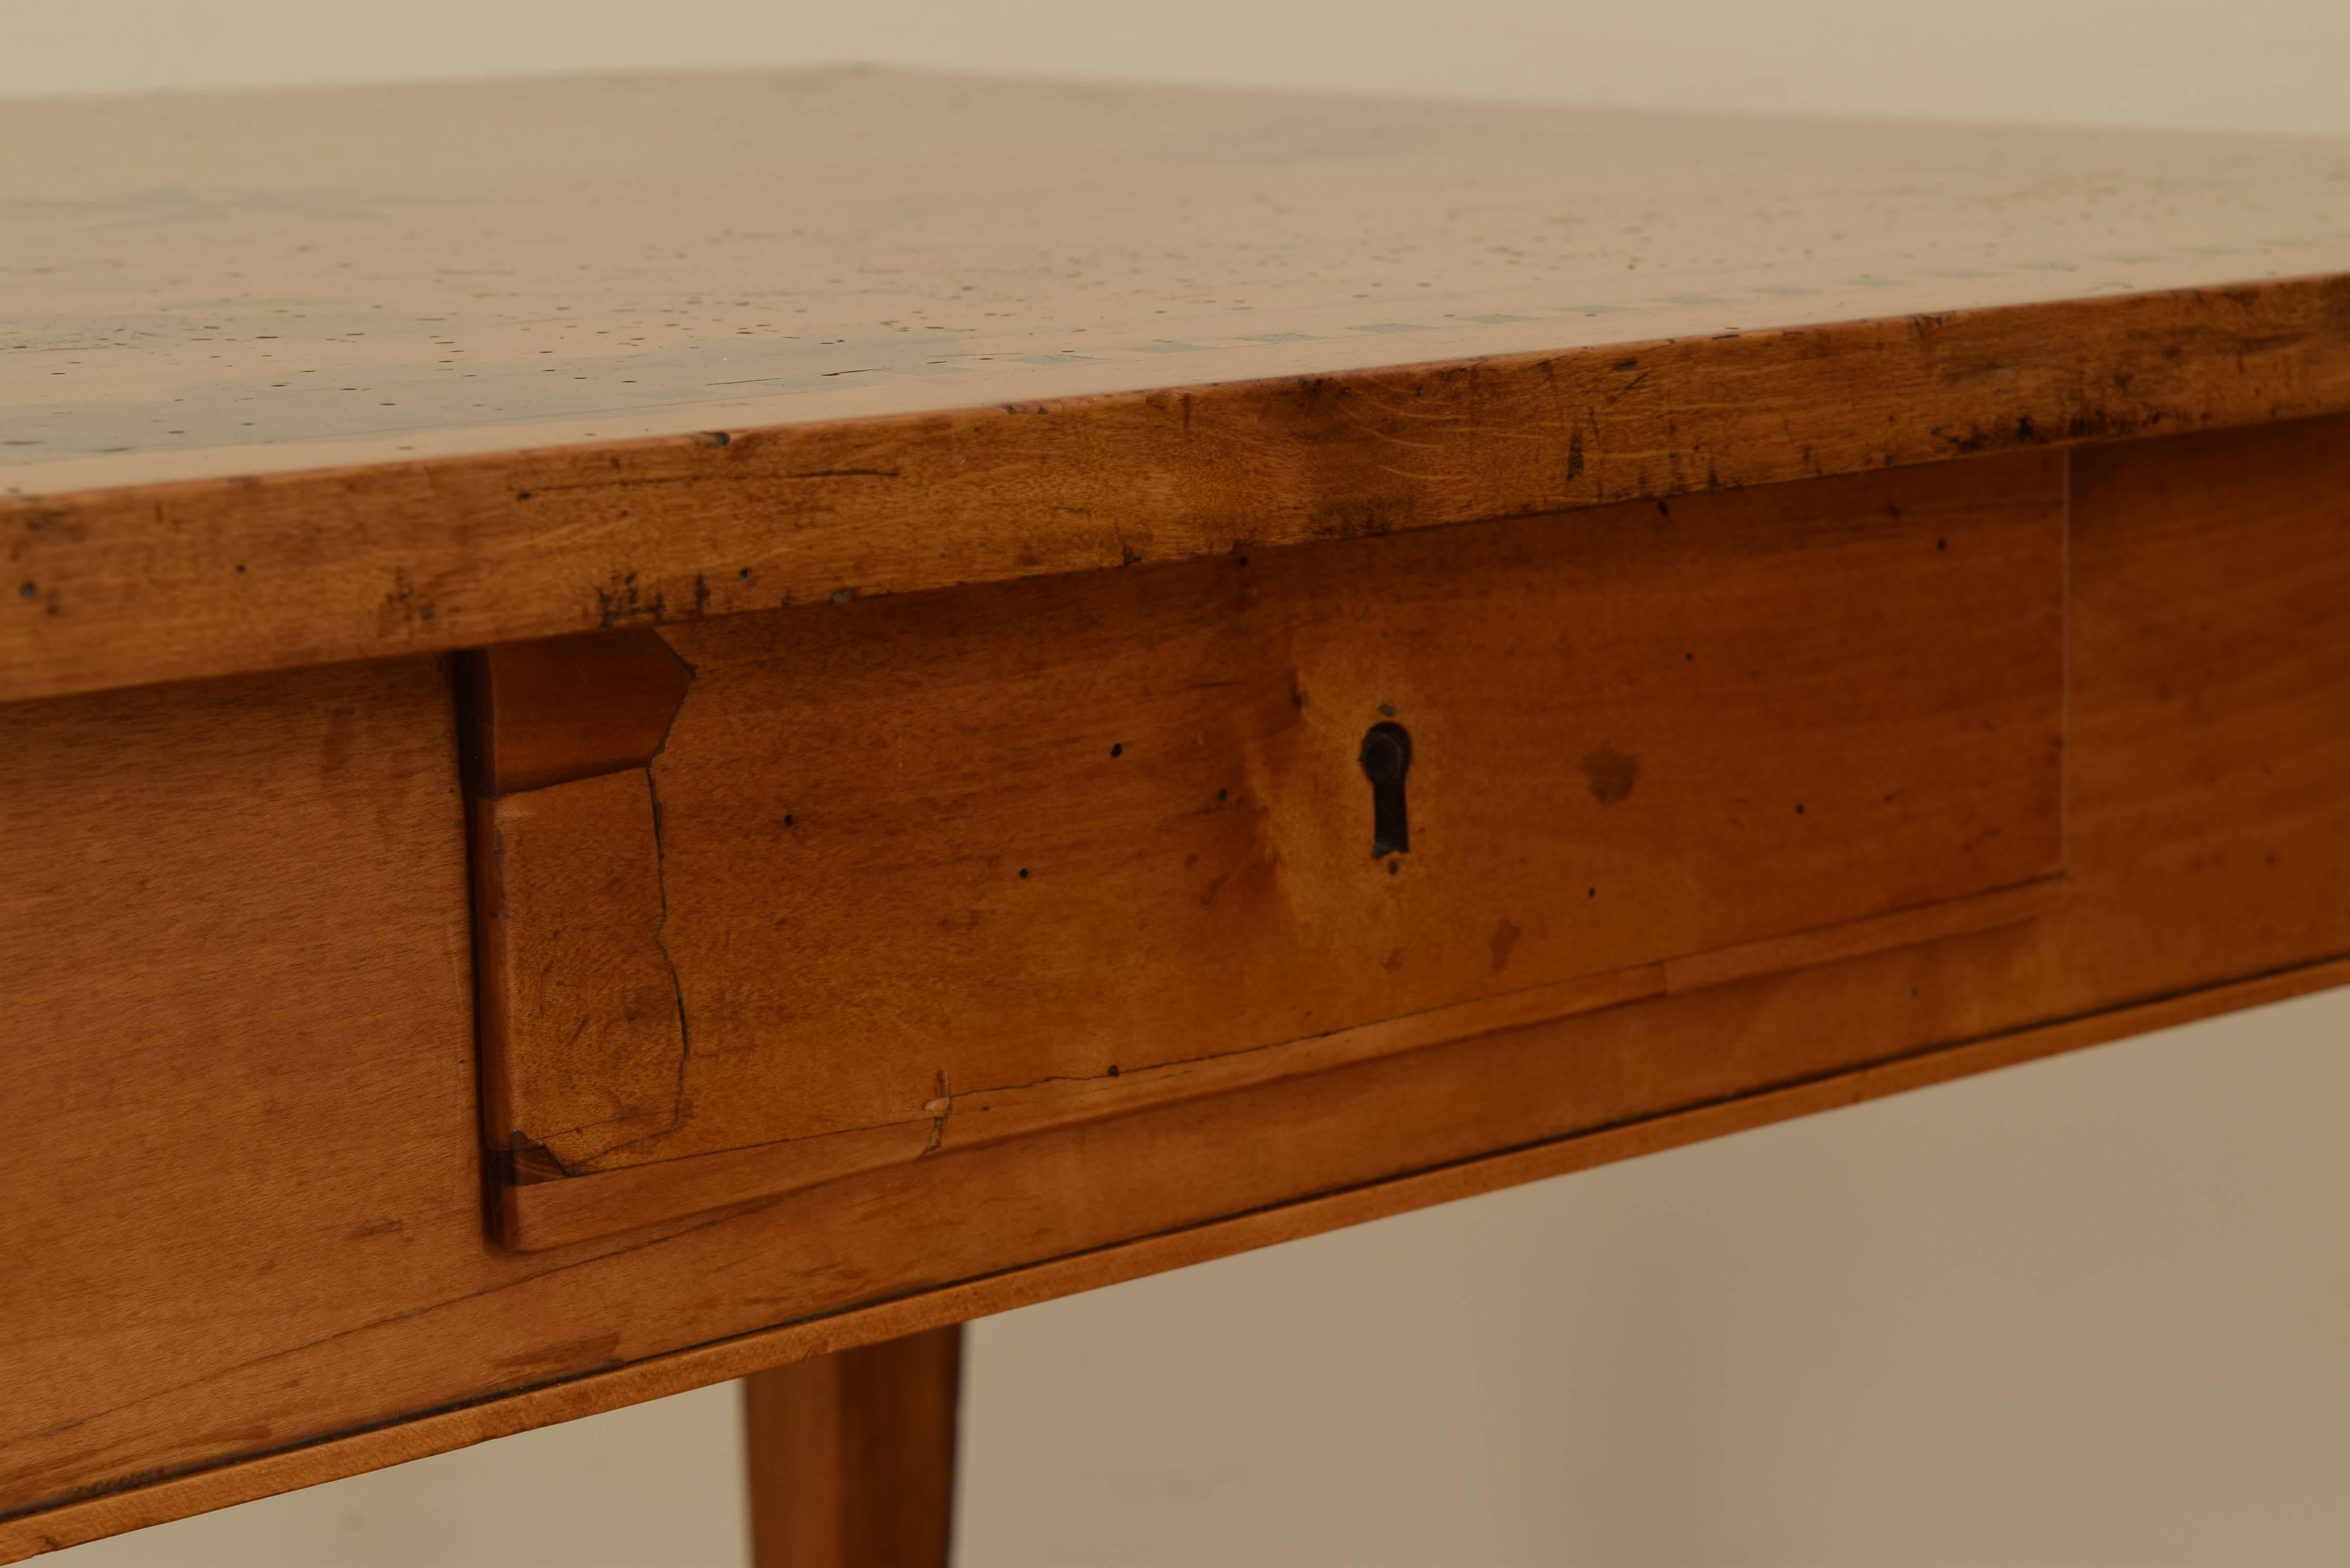 Early 19th Century Sicilian Fruitwood and Inlaid 1-Drawer Table, Late First Quarter of the 19th C.